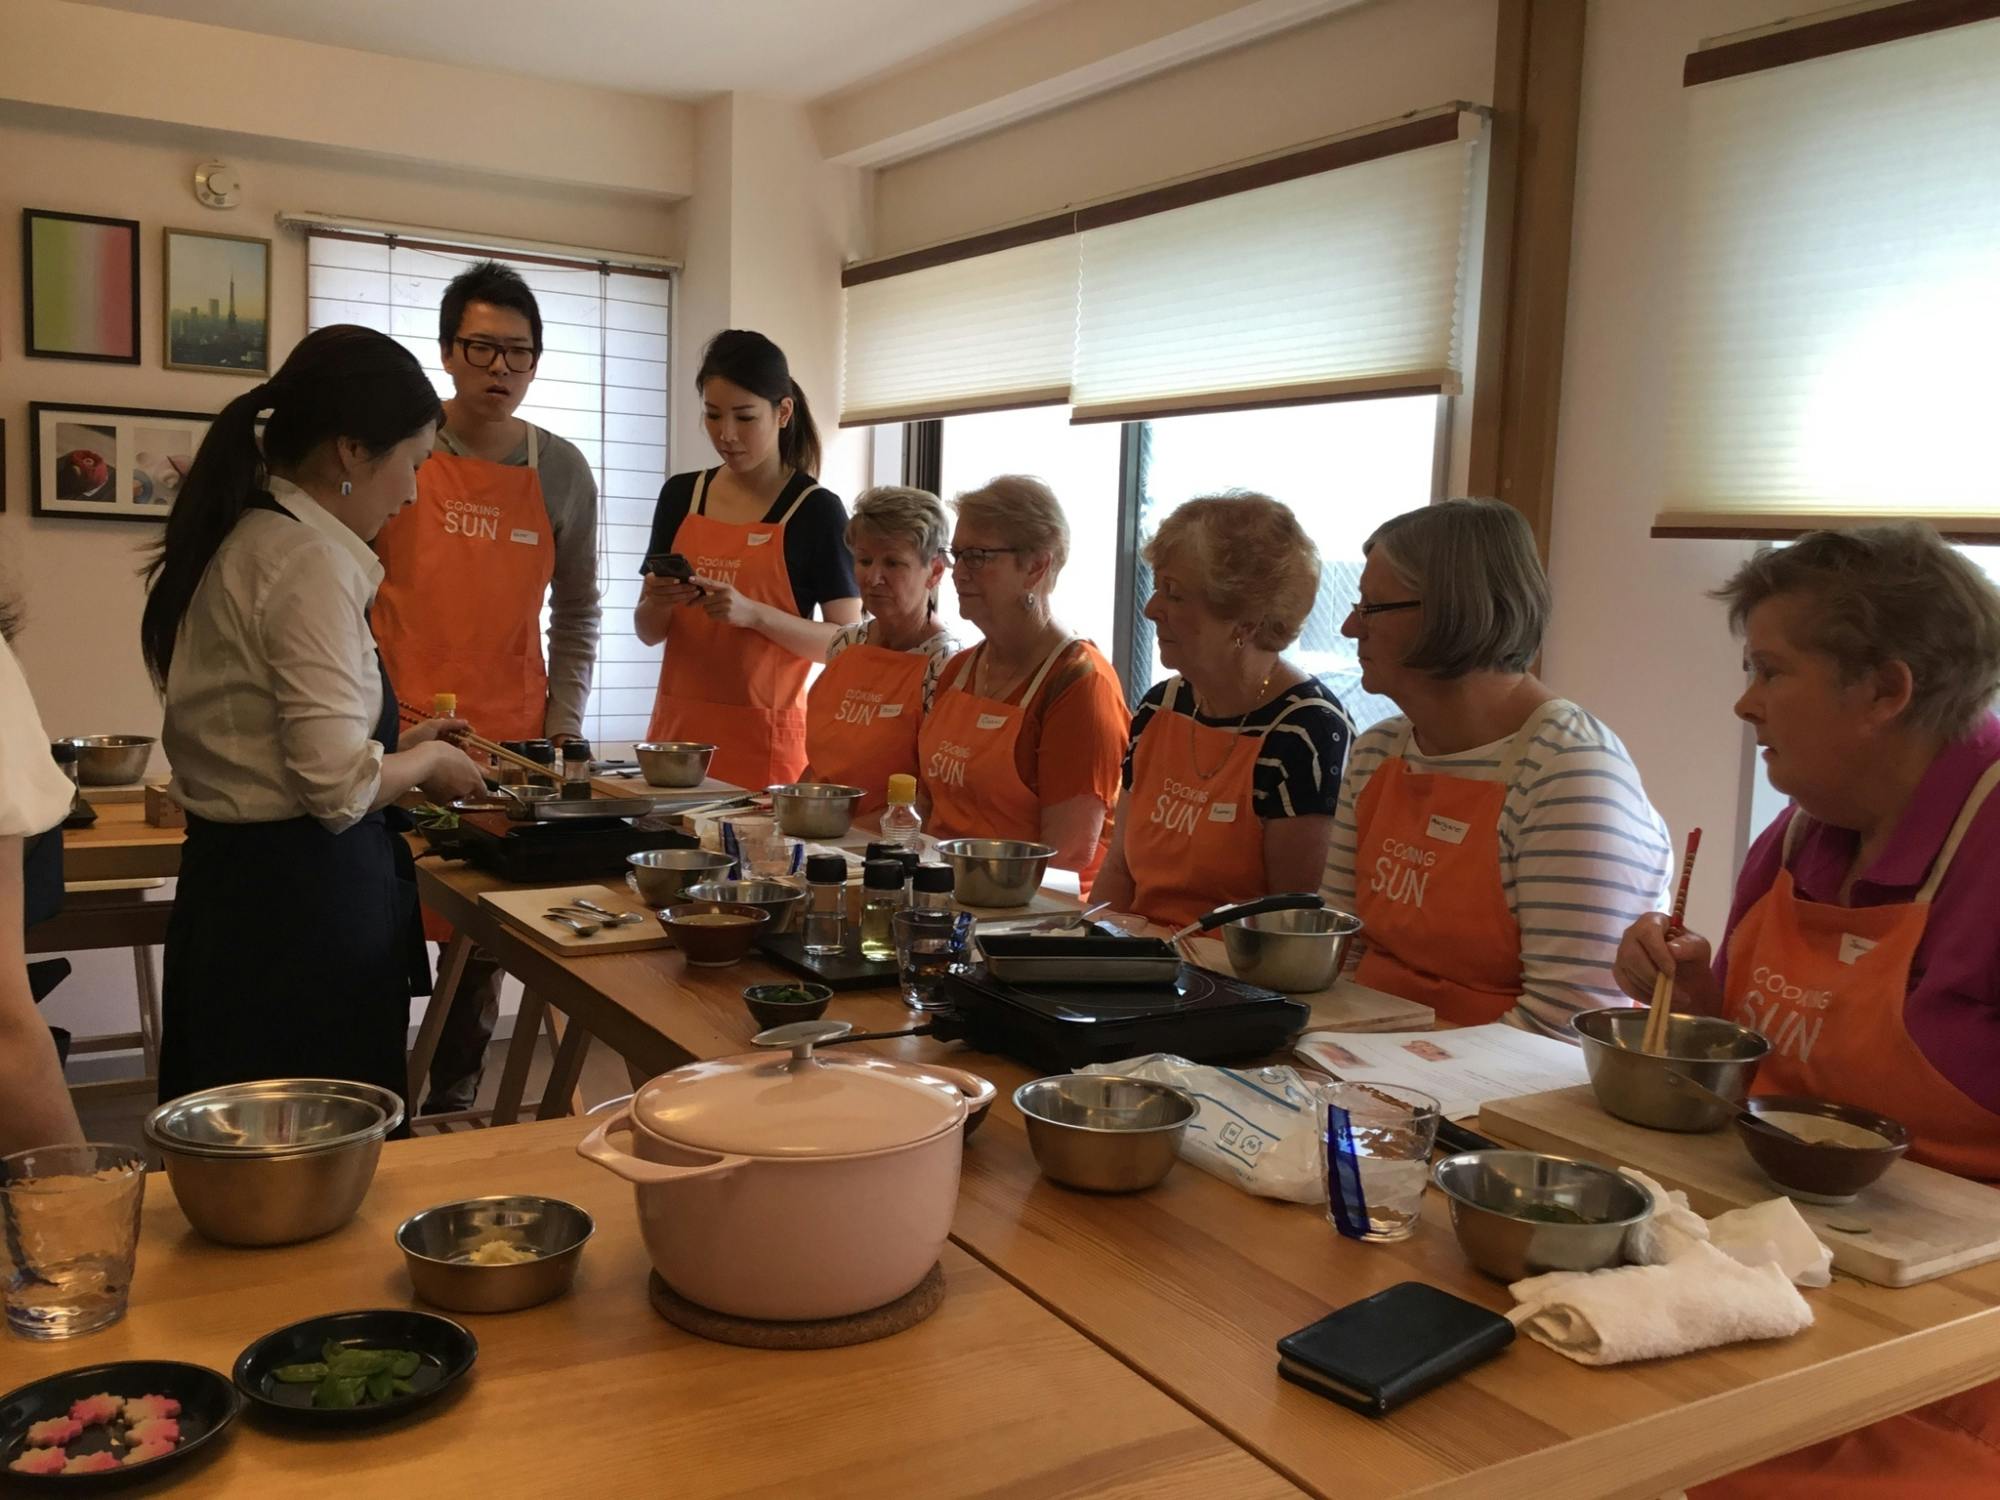 Sushi-making experience in Tokyo